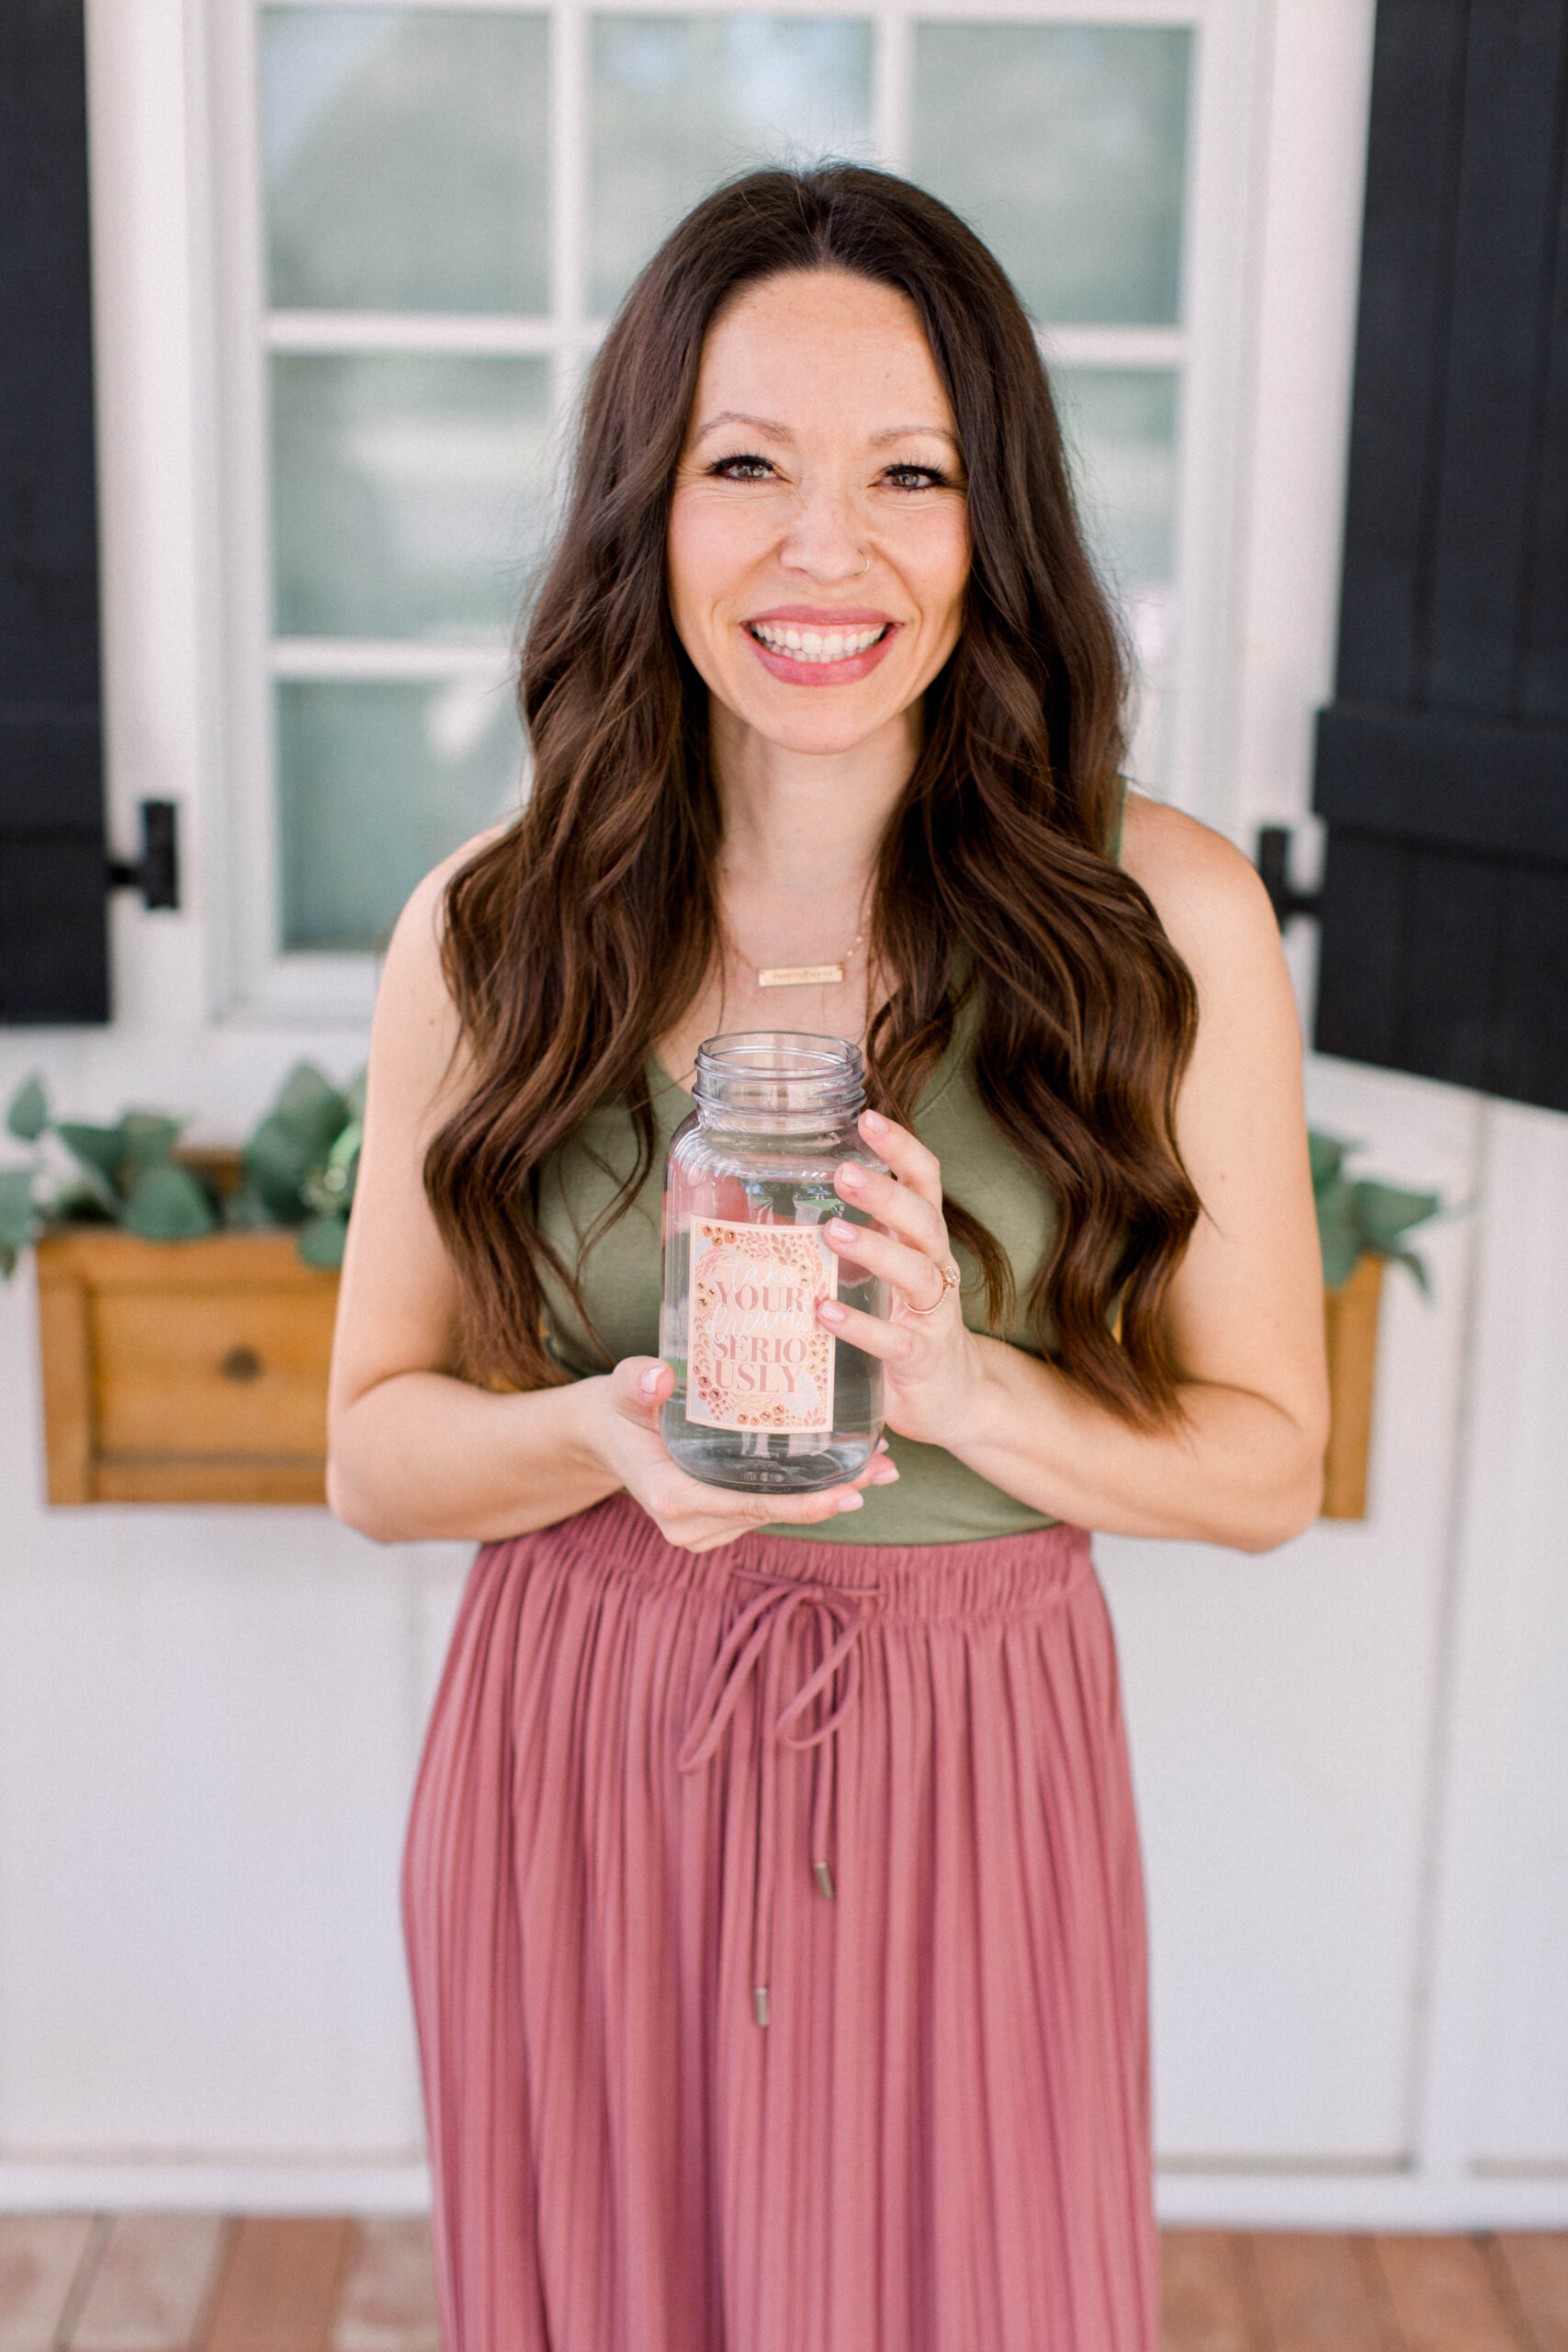 Chelsi Jo smiles into the camera holding a mason jar, wearing an olive green tank and a dusty pink skirt